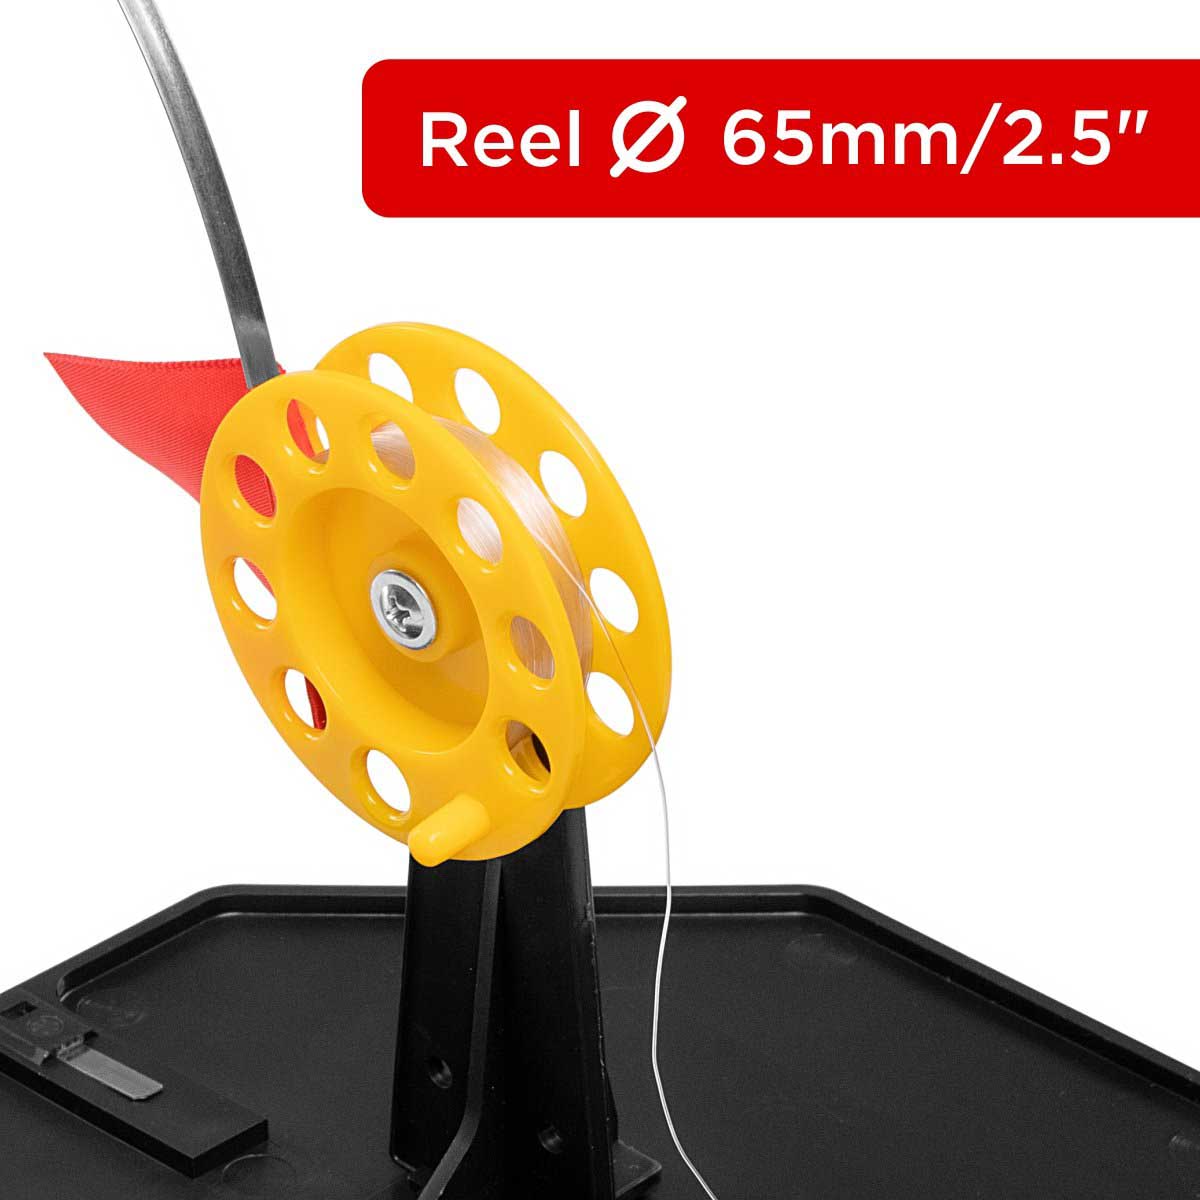 Tip-up Pop-Up Integrated Hole-Cover Easy to Clip has either 2.5 inches, or 3.3 inches spool diameter